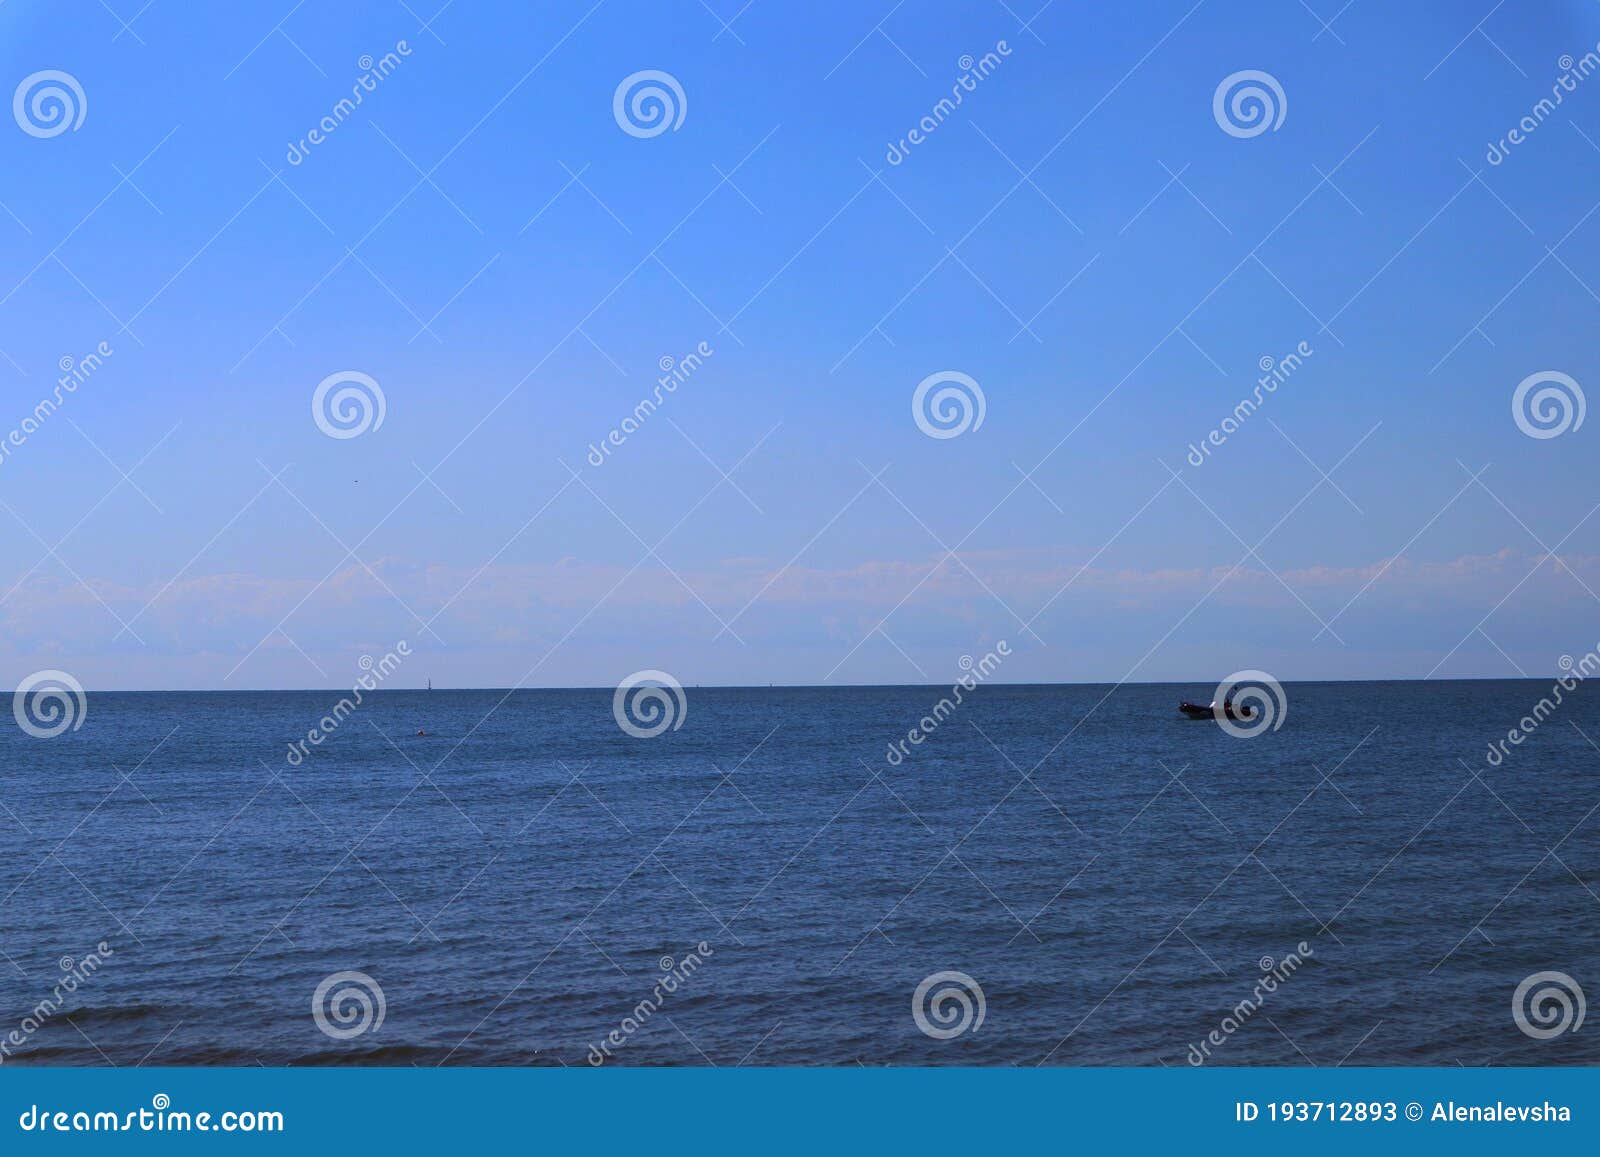 sea background, bote in the sea background summer